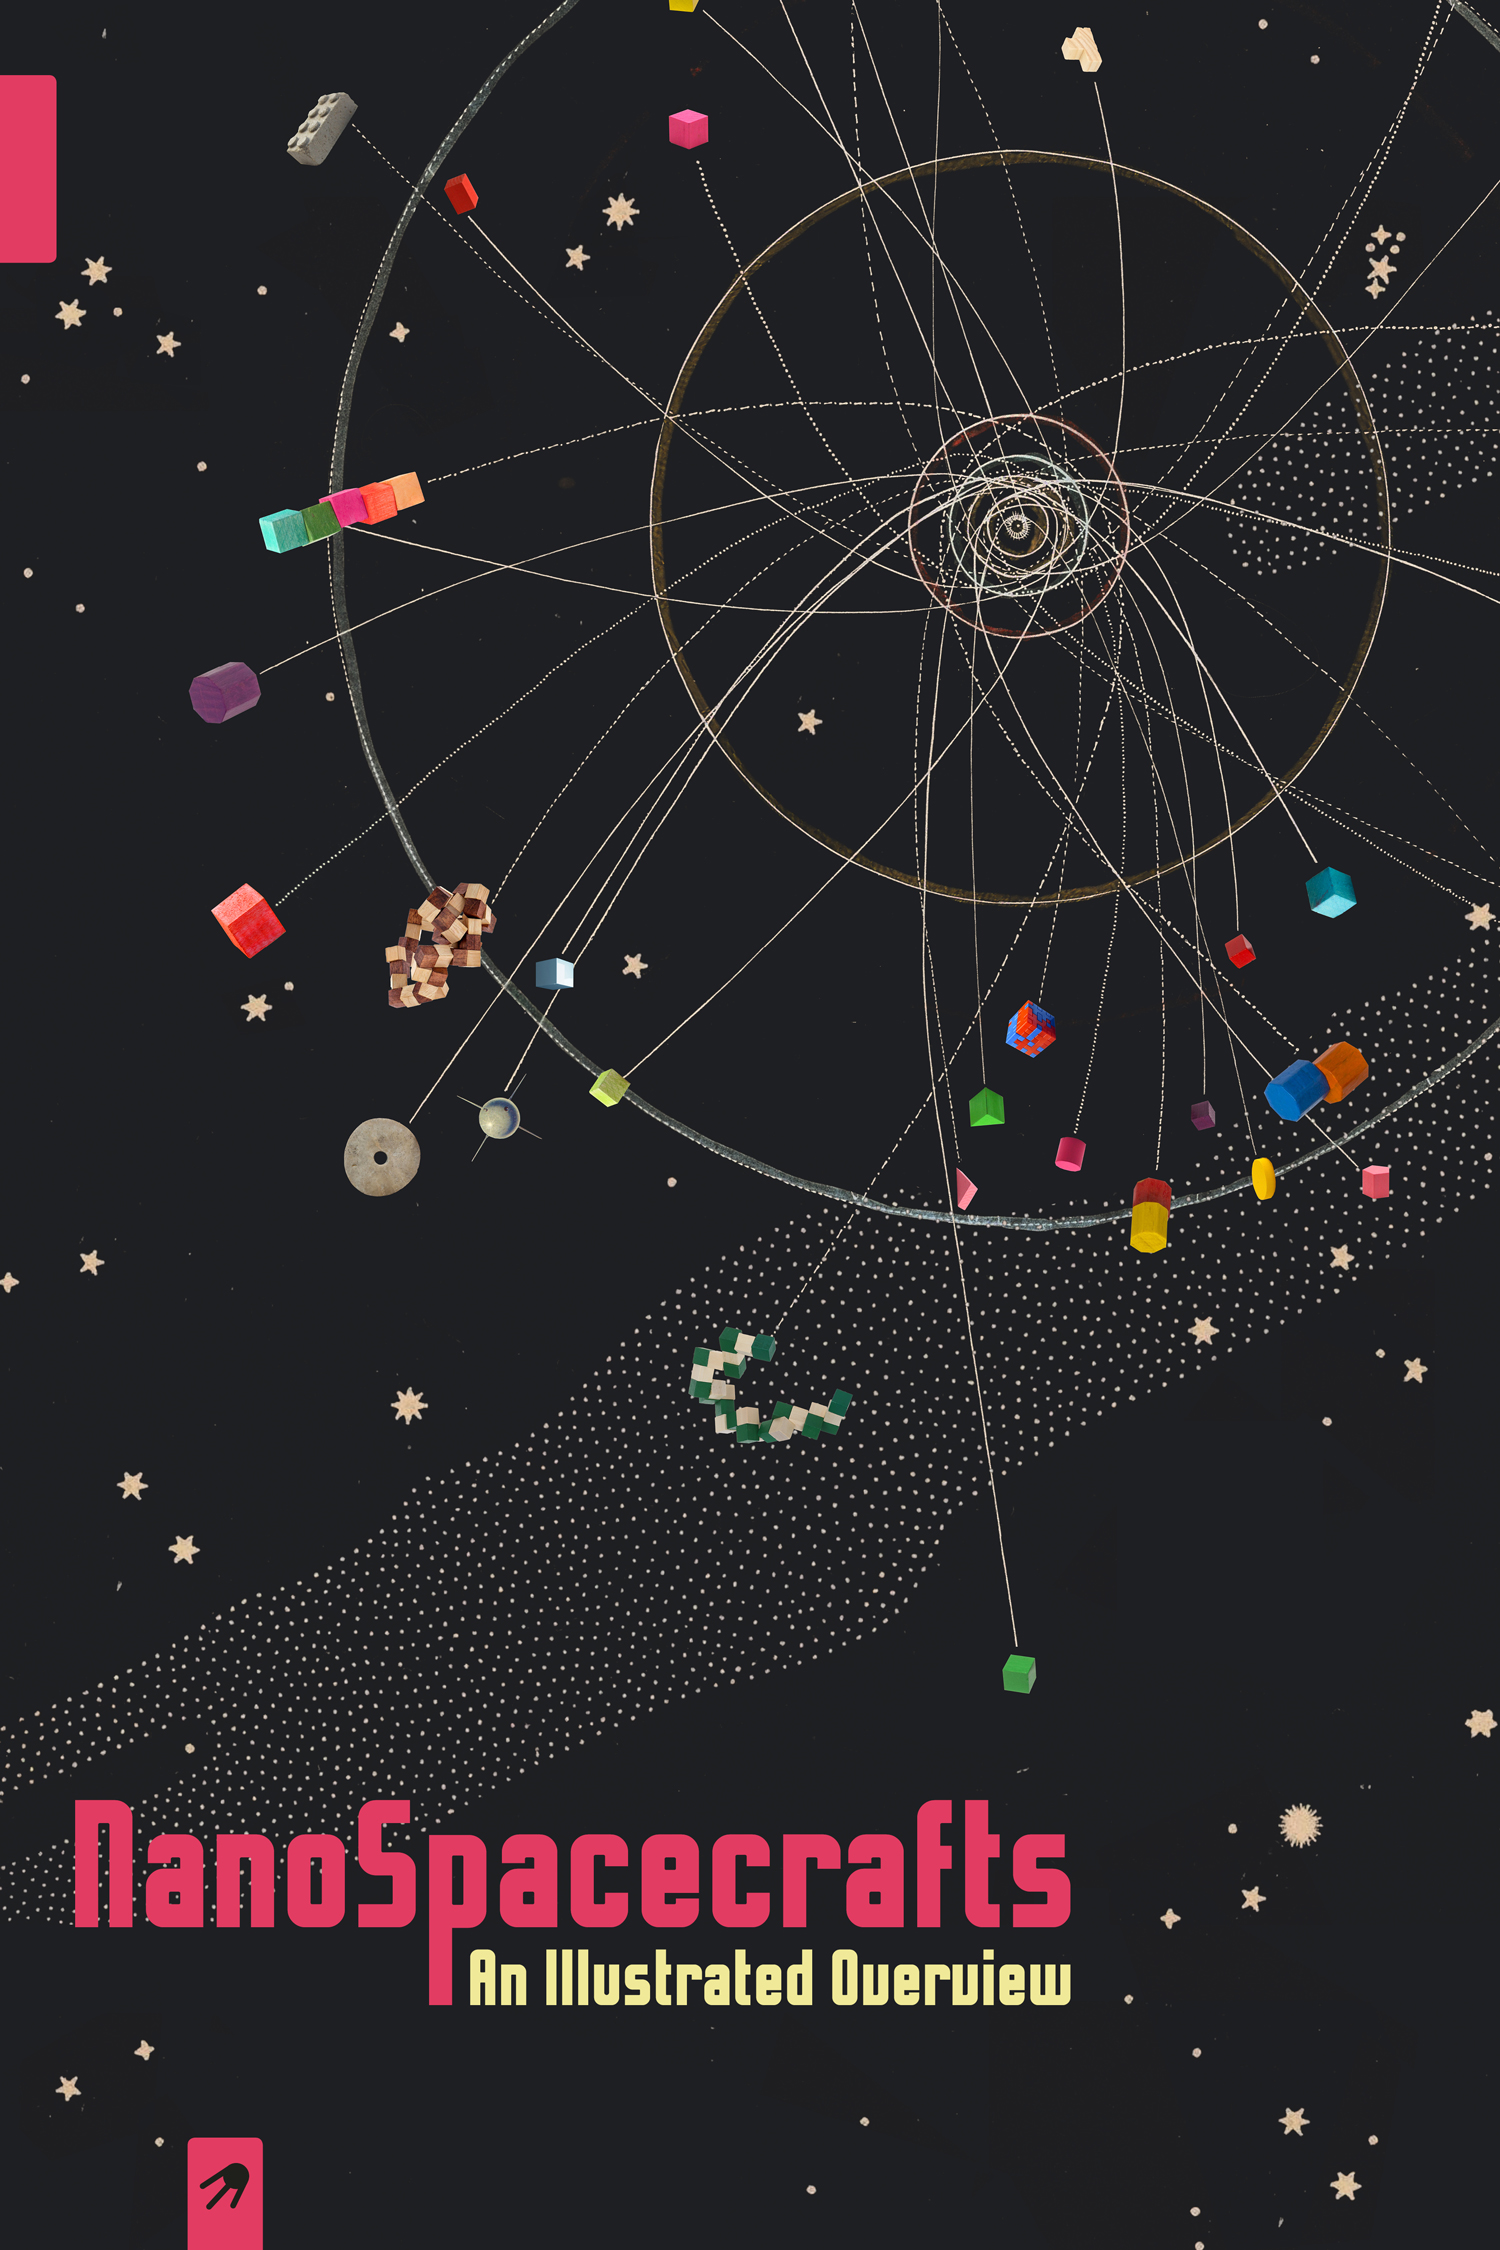 NANOSPACECRAFTS. An Illustrated Overview